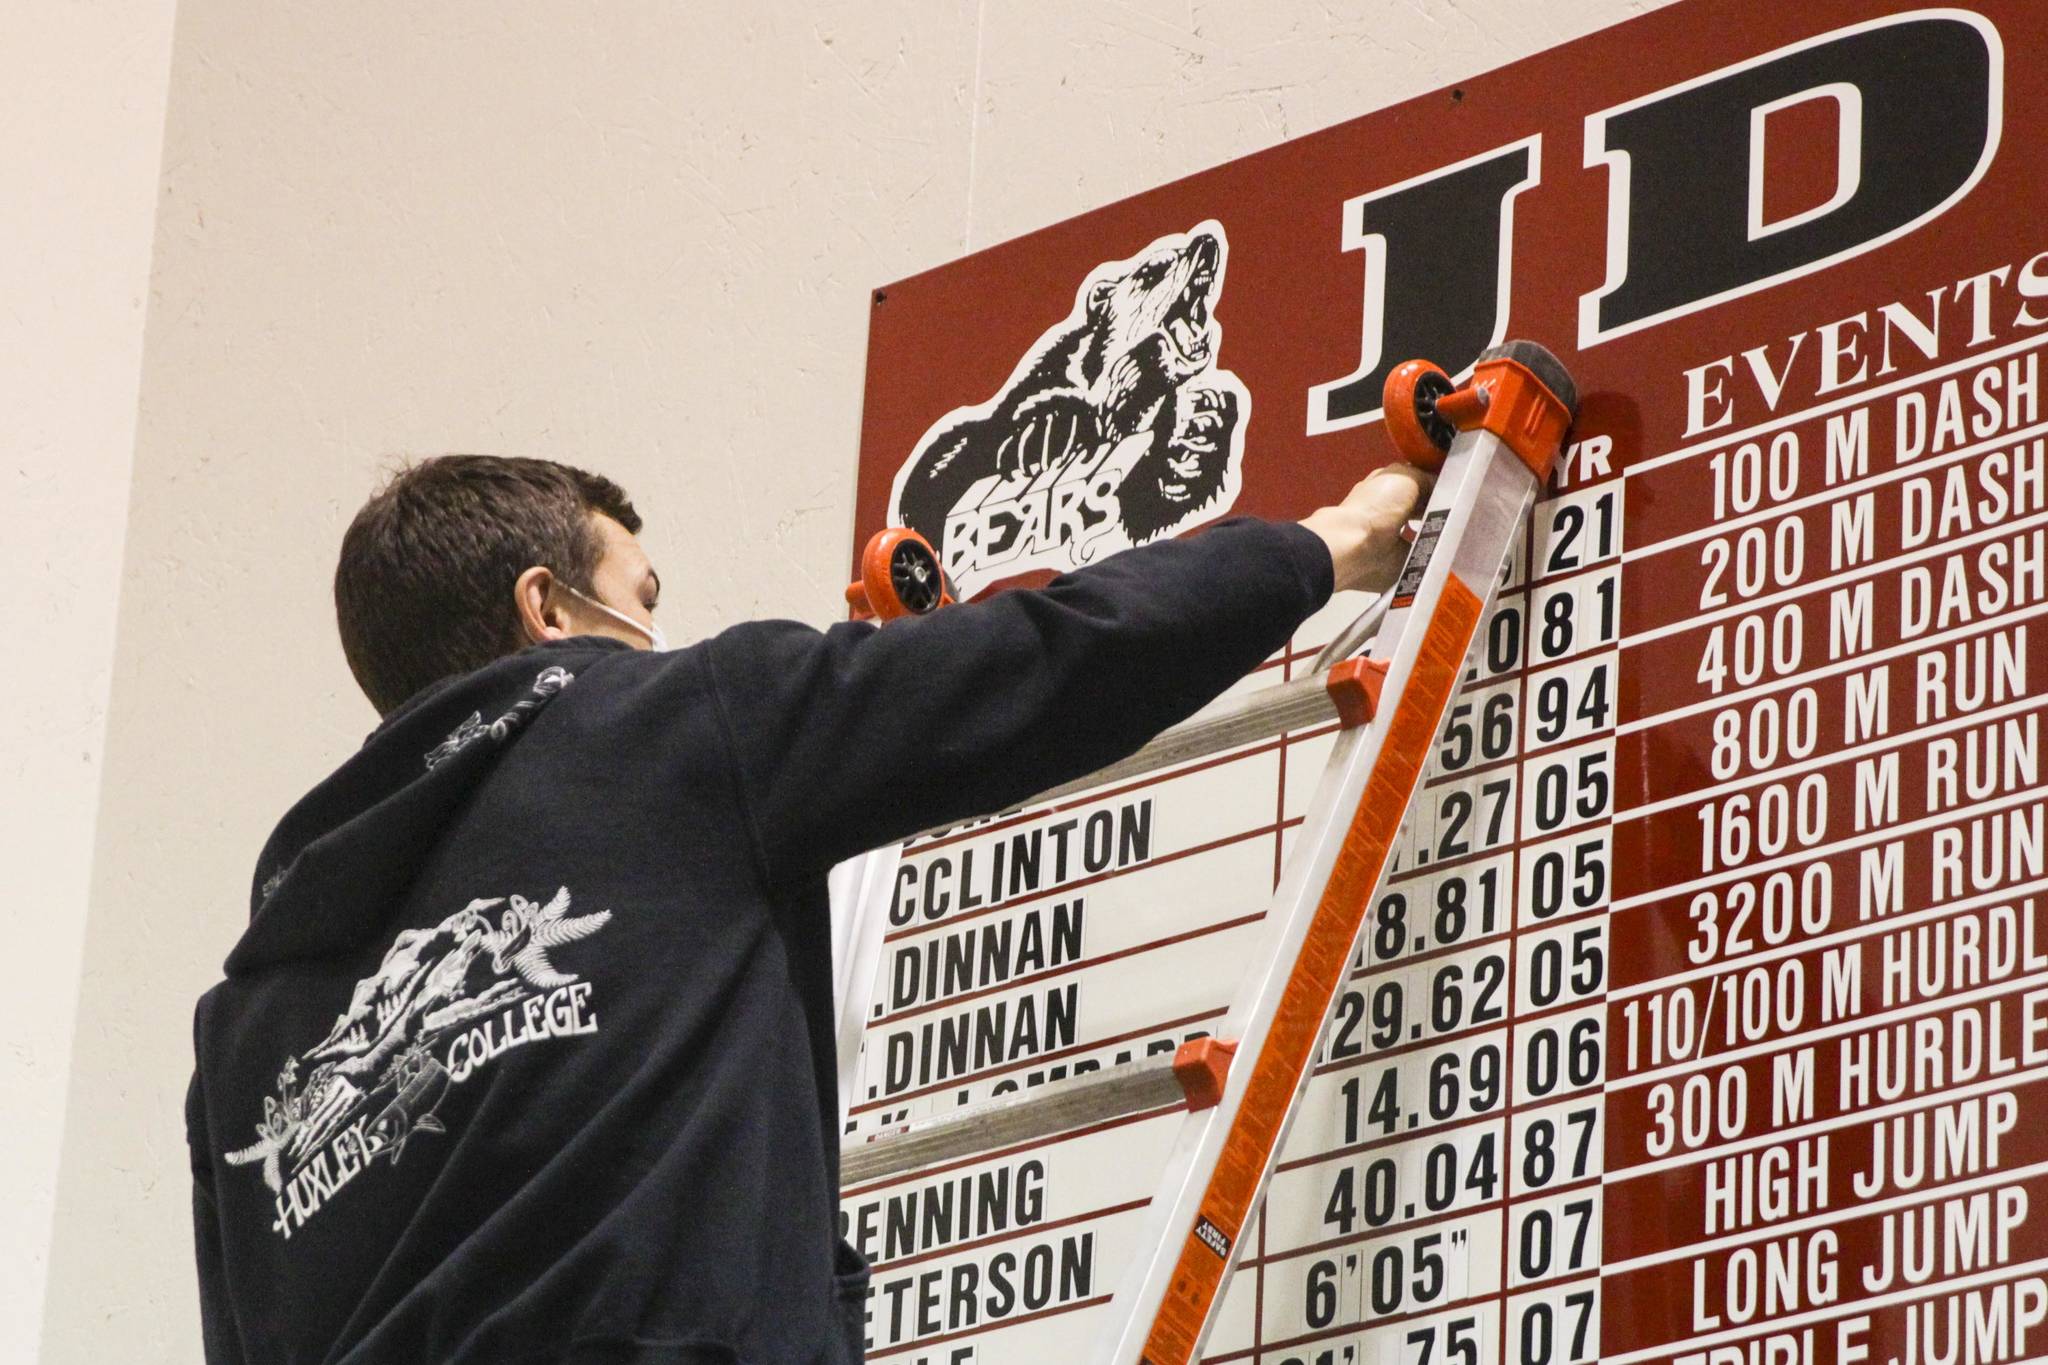 Zack Pursell, assistant coach for the Juneau-Douglas High School: Yadaa.at Kalé track team, puts James Connally’s name on the school record board for breaking a long-standing record for the 100 meter dash on May 11, 2021. (Michael S. Lockett / Juneau Empire)